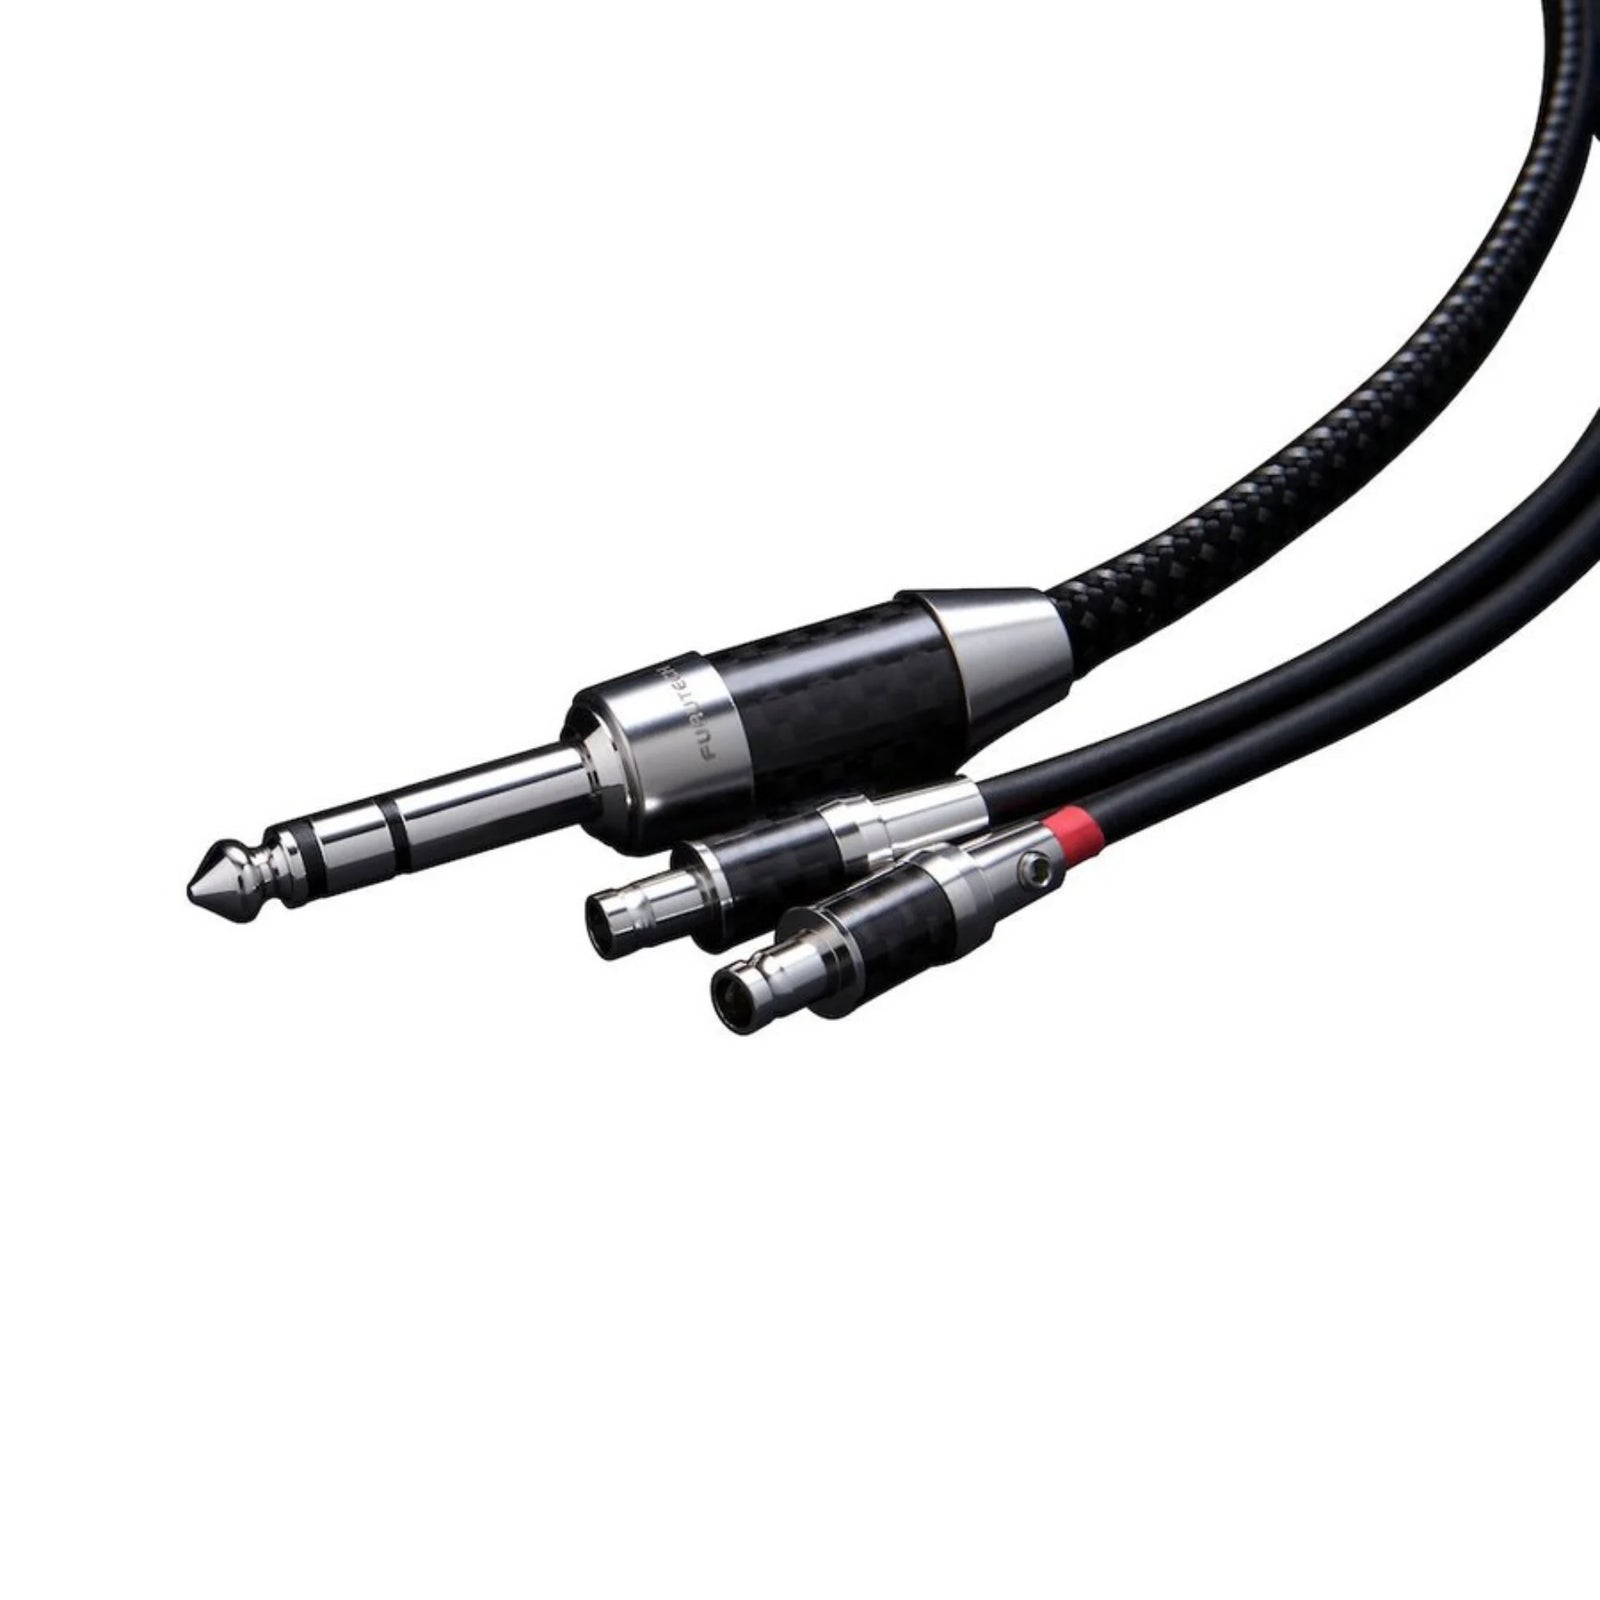 ALPHA DESIGN LABS HEADPHONE CABLE iHP-35Hx-1.3m Headphone Cable 6.3mm stereo to connector for Sennheiser HD-800 (1.3M) iHP-35Hx-3.0m Headphone Cable 6.3mm stereo to connector for Sennheiser HD-800 (3.0M) iHP-35Hx-XLR-1.3m Headphone Cable XLR to connector for Sennheiser HD-800 (1.3M) iHP-35Hx-XLR-3.0m Availabe at Vinyl Sound